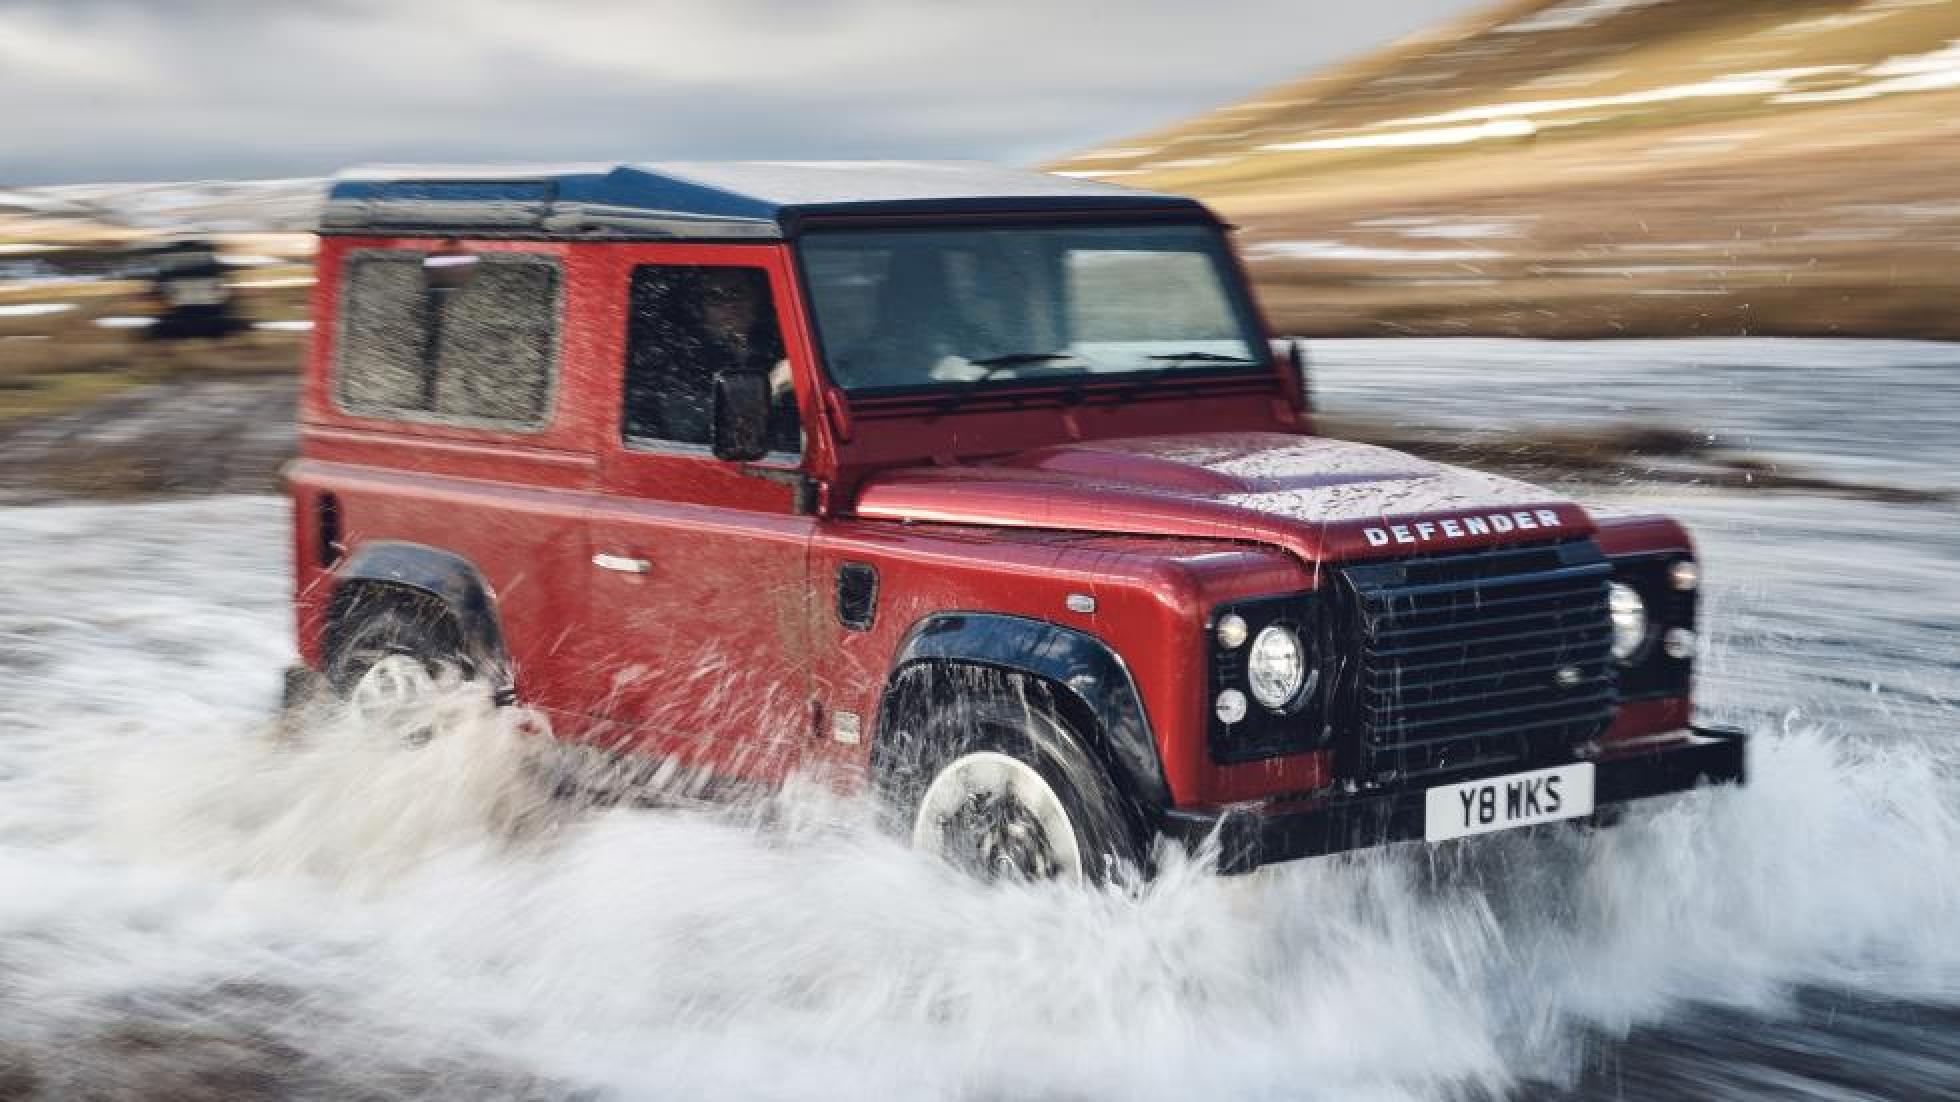 12. Land Rover Defender 70th anniversary